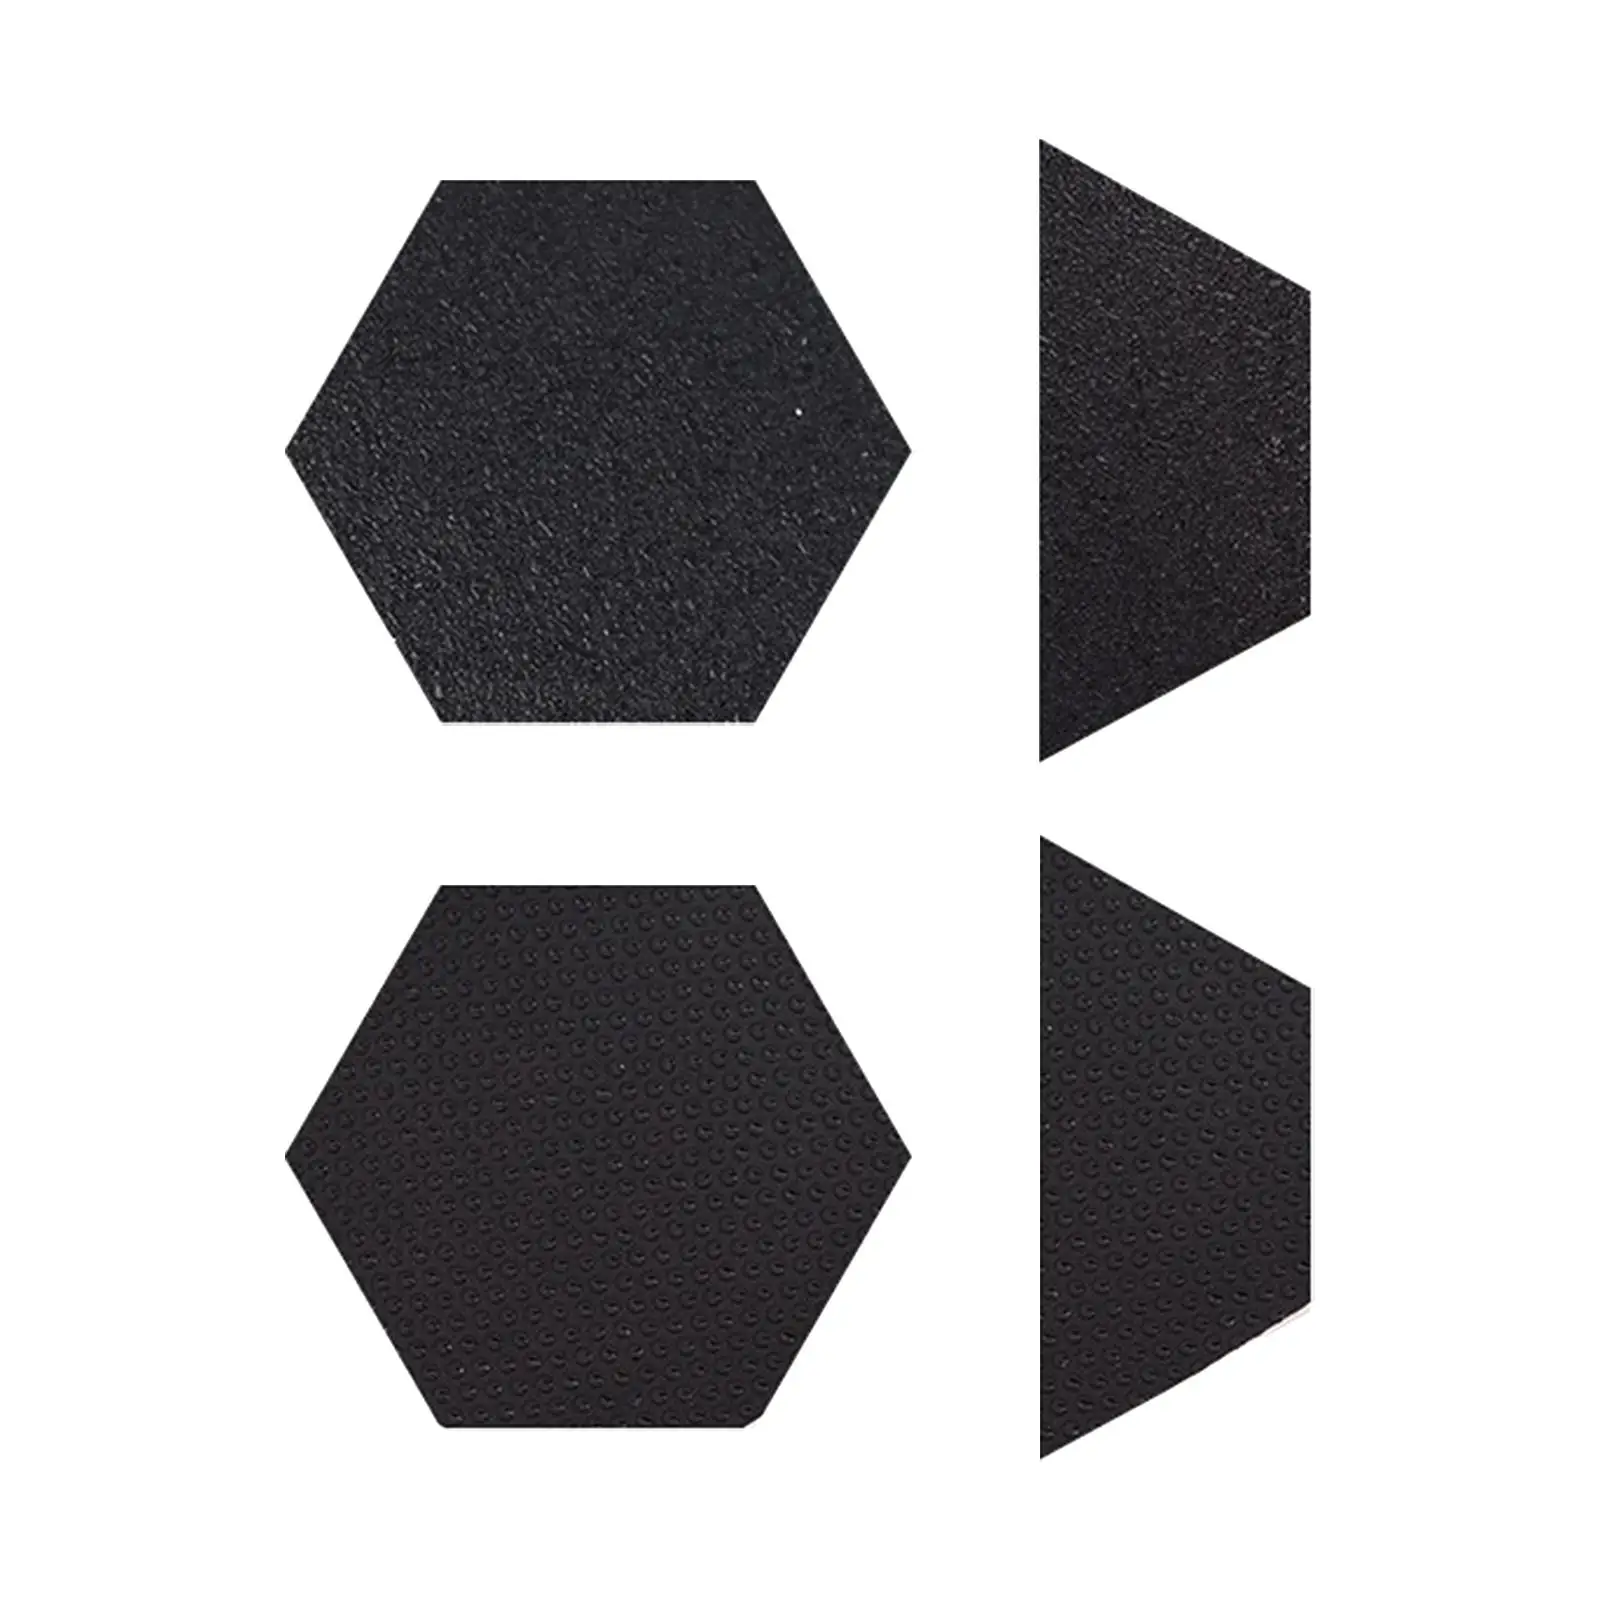 Hexagon Surfboard Pads Anti Slip Mat Waxless Deck Pads for Shortboards Surf Boards Skimboarding Grip Surf Paddleboard